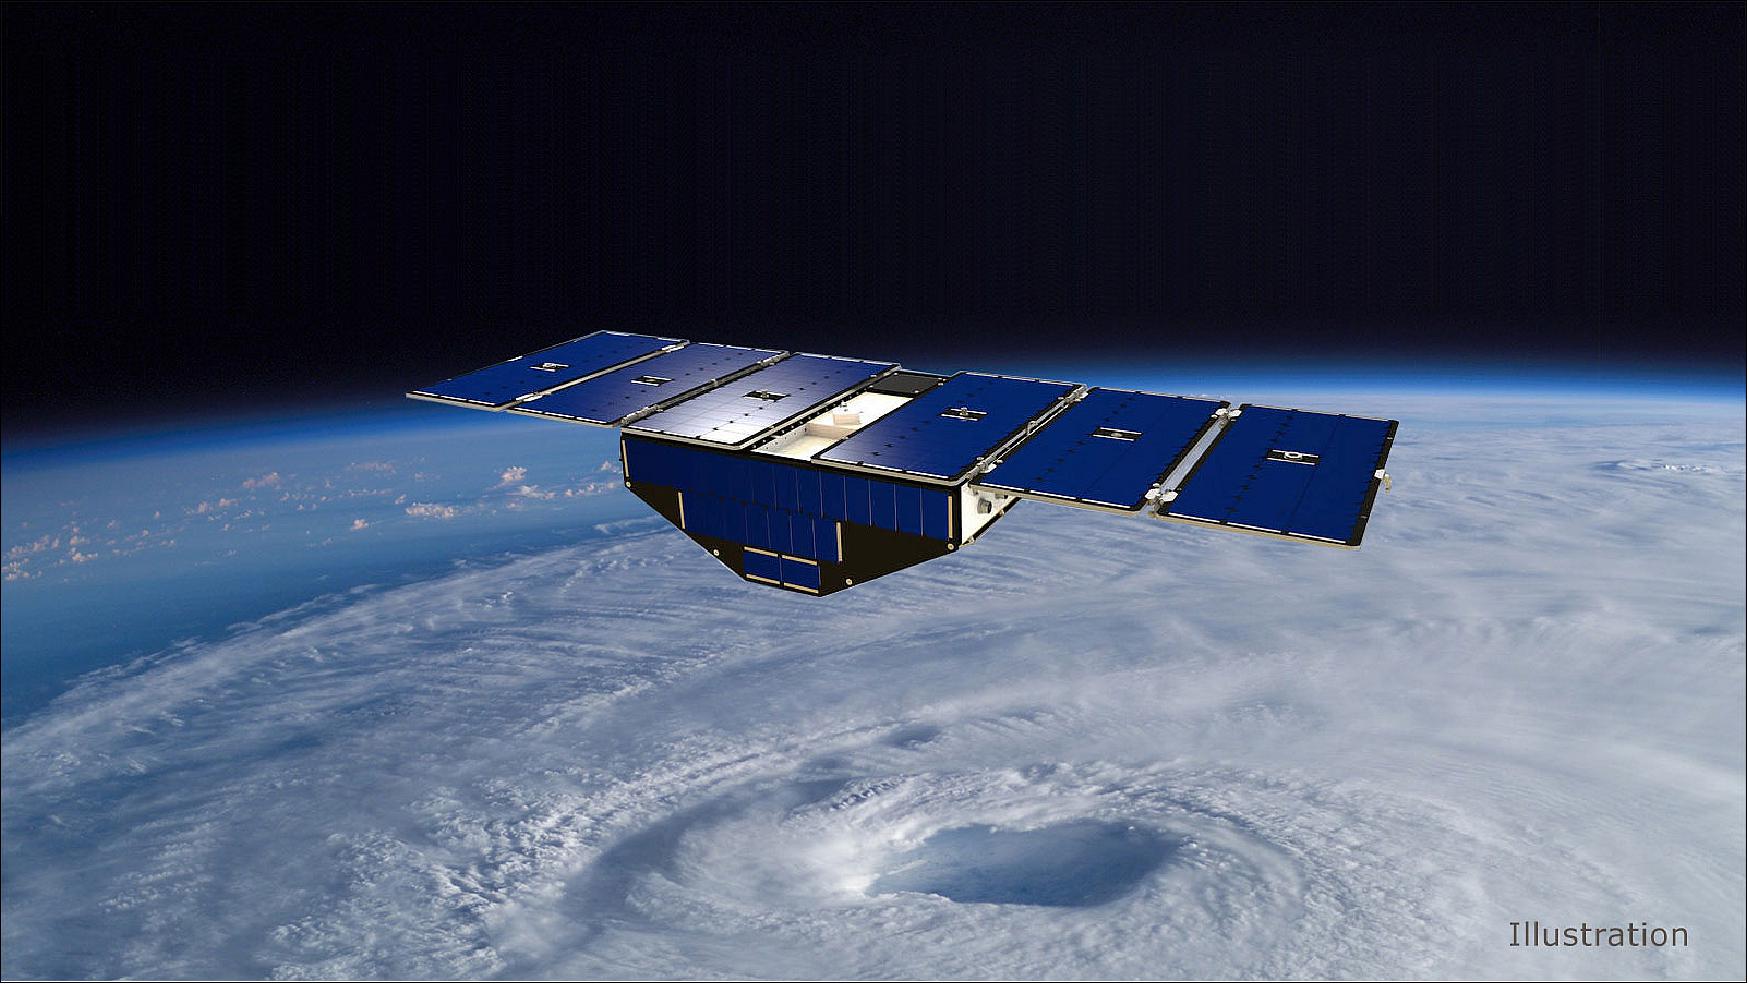 Figure 30: Illustration of one of the eight CYGNSS satellites in orbit above a hurricane (image credit: NASA)